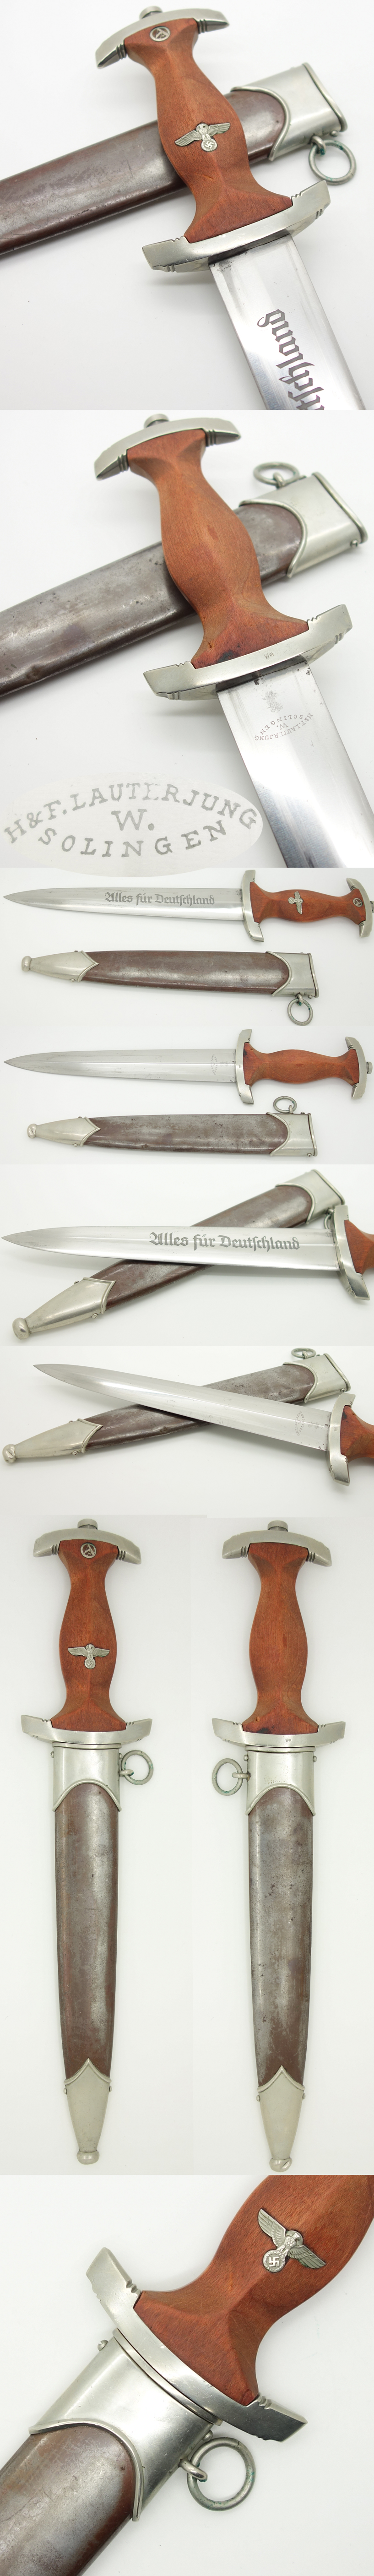 Early SA Dagger by H & F. Lauterjung